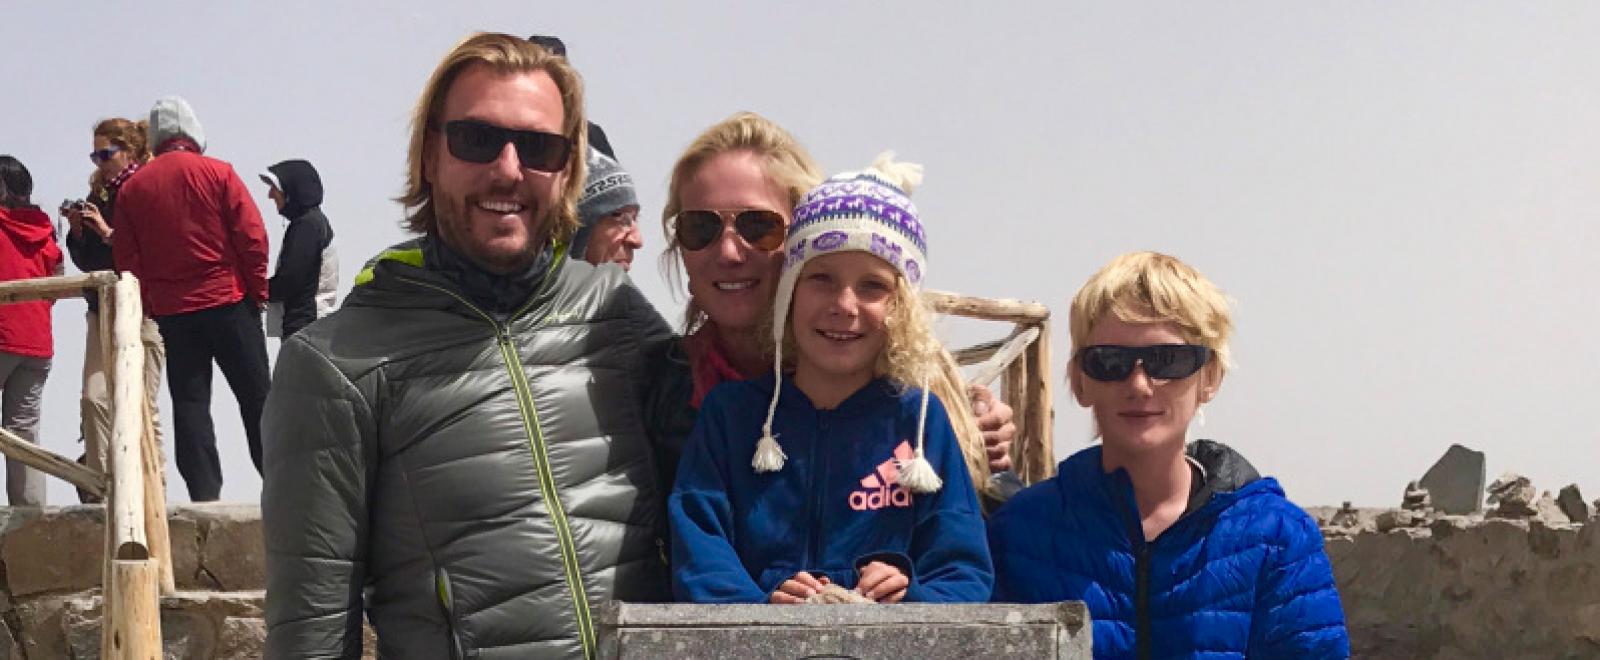 Belgian family at the top of the Andes Mountain range in Peru